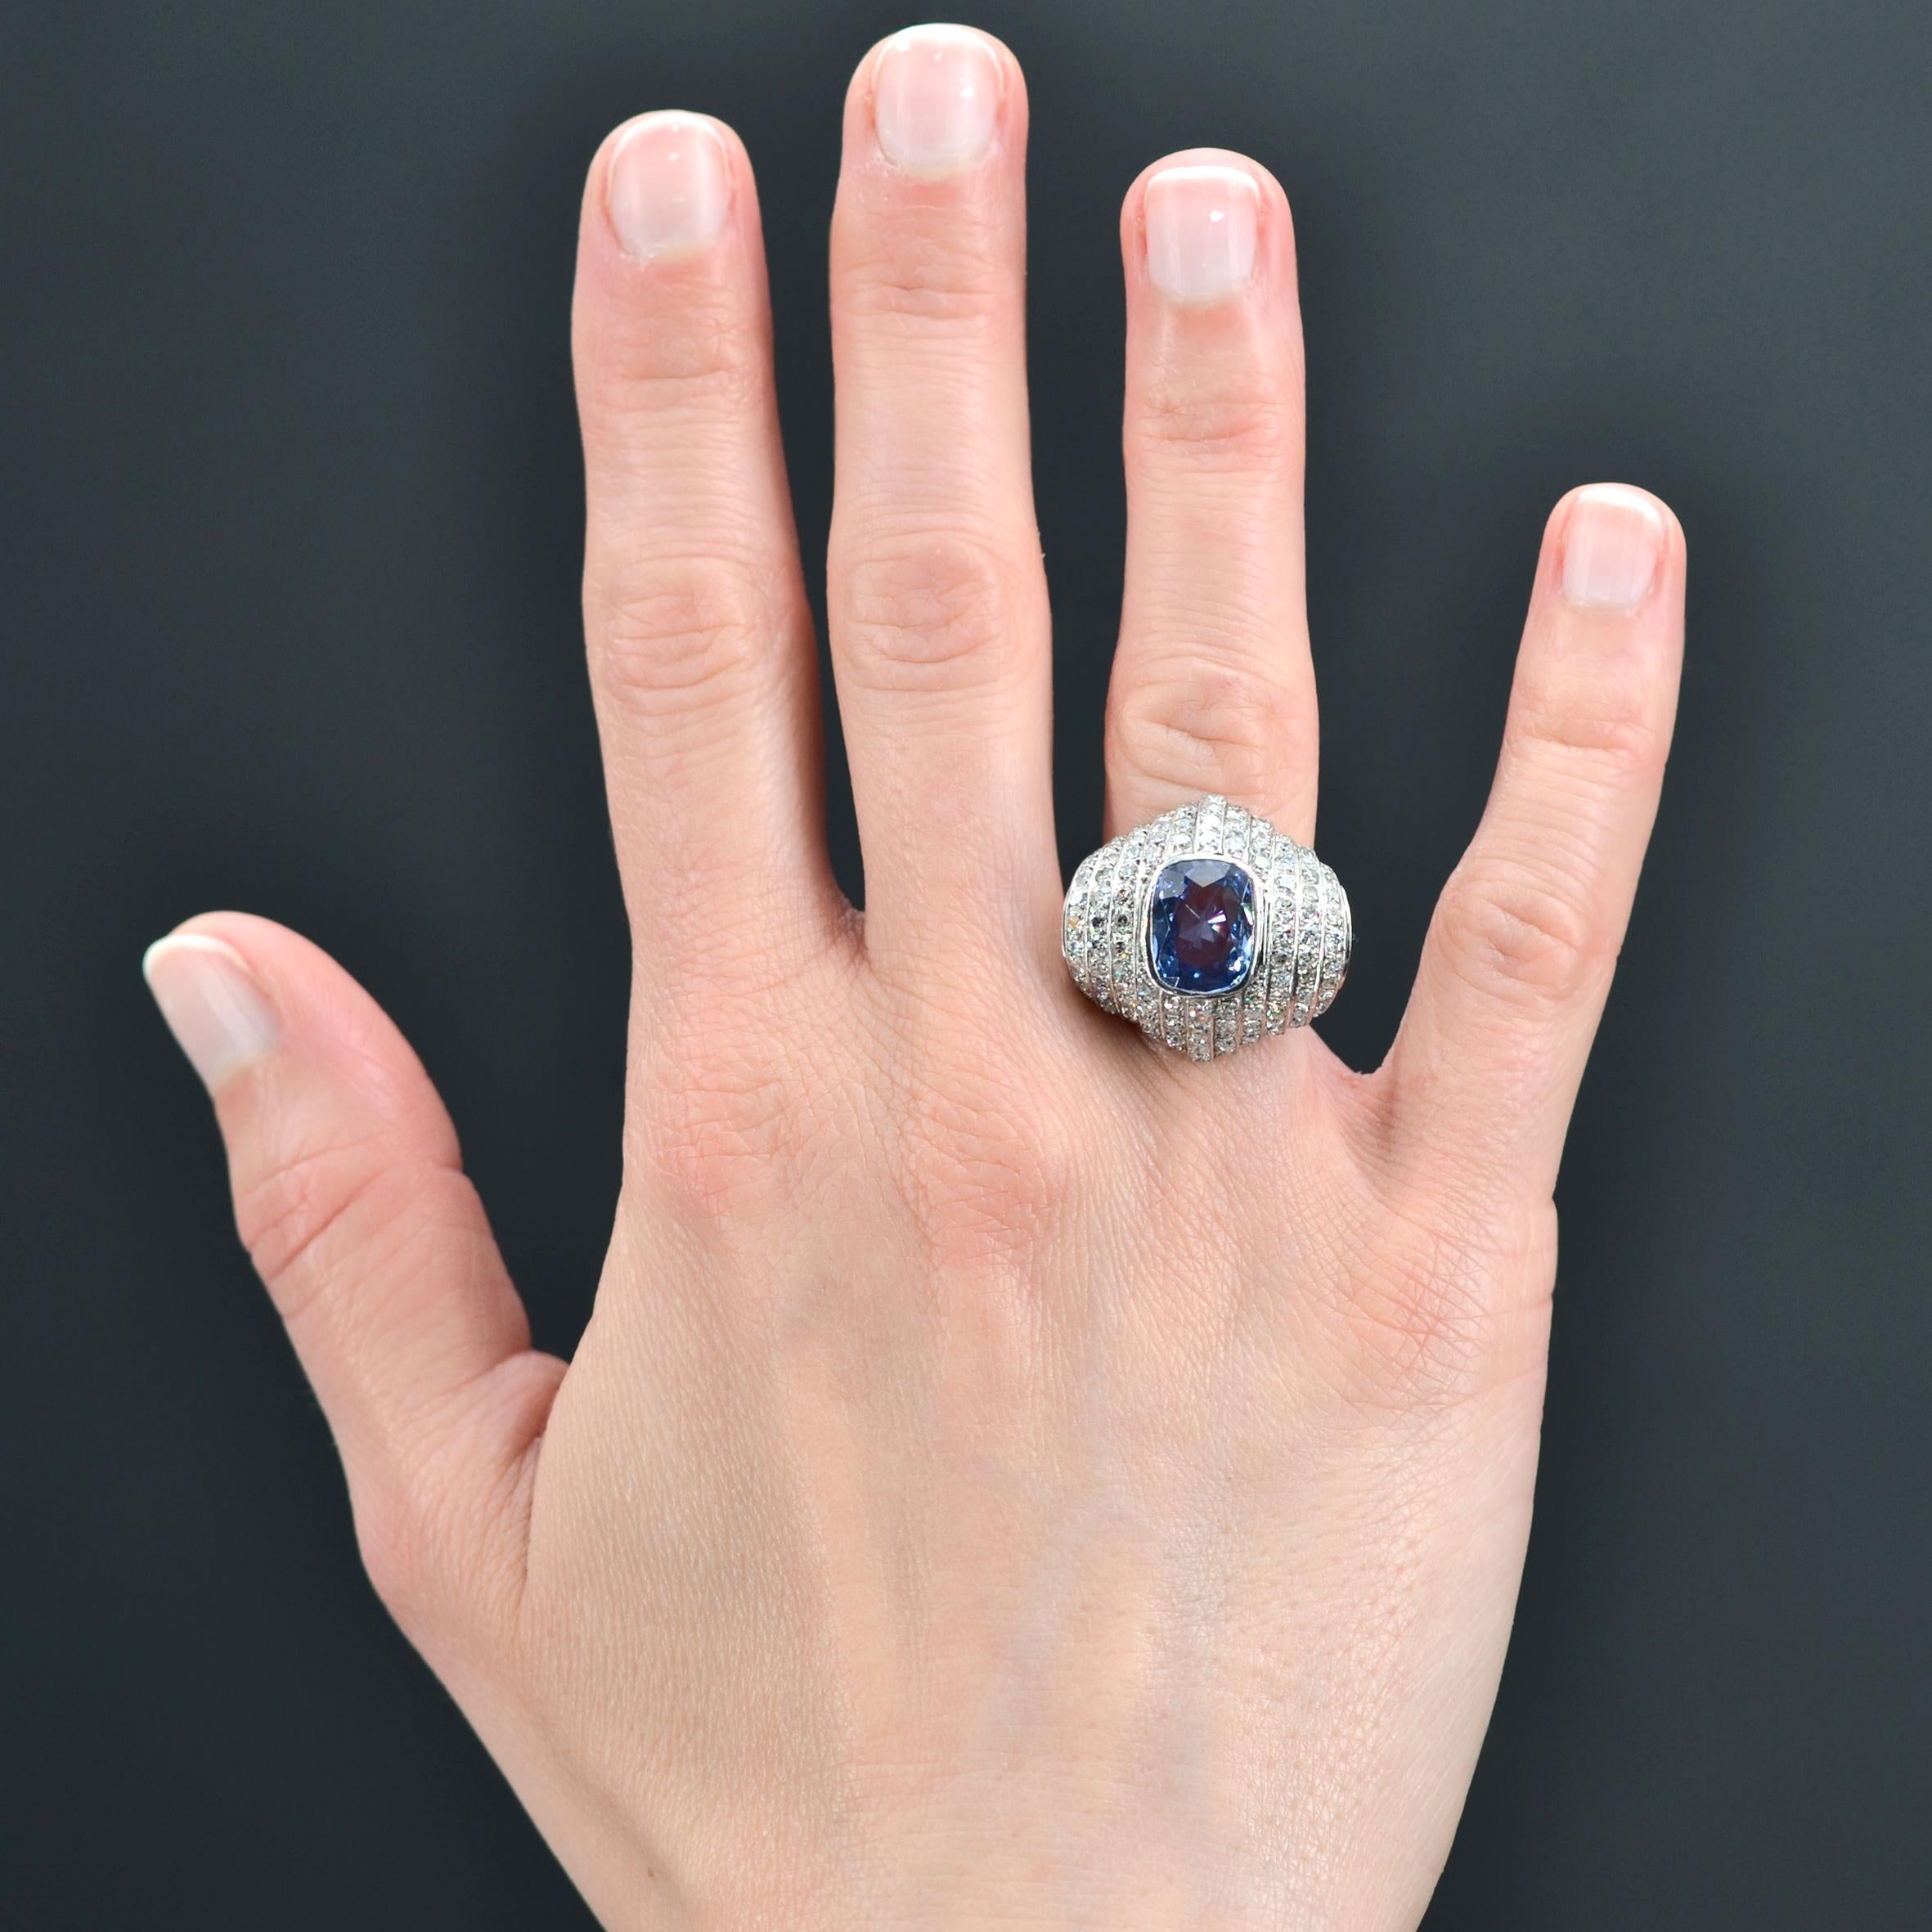 Ring in platinum, dog head hallmark.
Sublime and imposing Art Deco ring, it is set with a natural and certified cushion-cut sapphire on its domed top. The setting is made of falling stepped motifs set with 8/8 and antique- cut diamonds.
Weight of